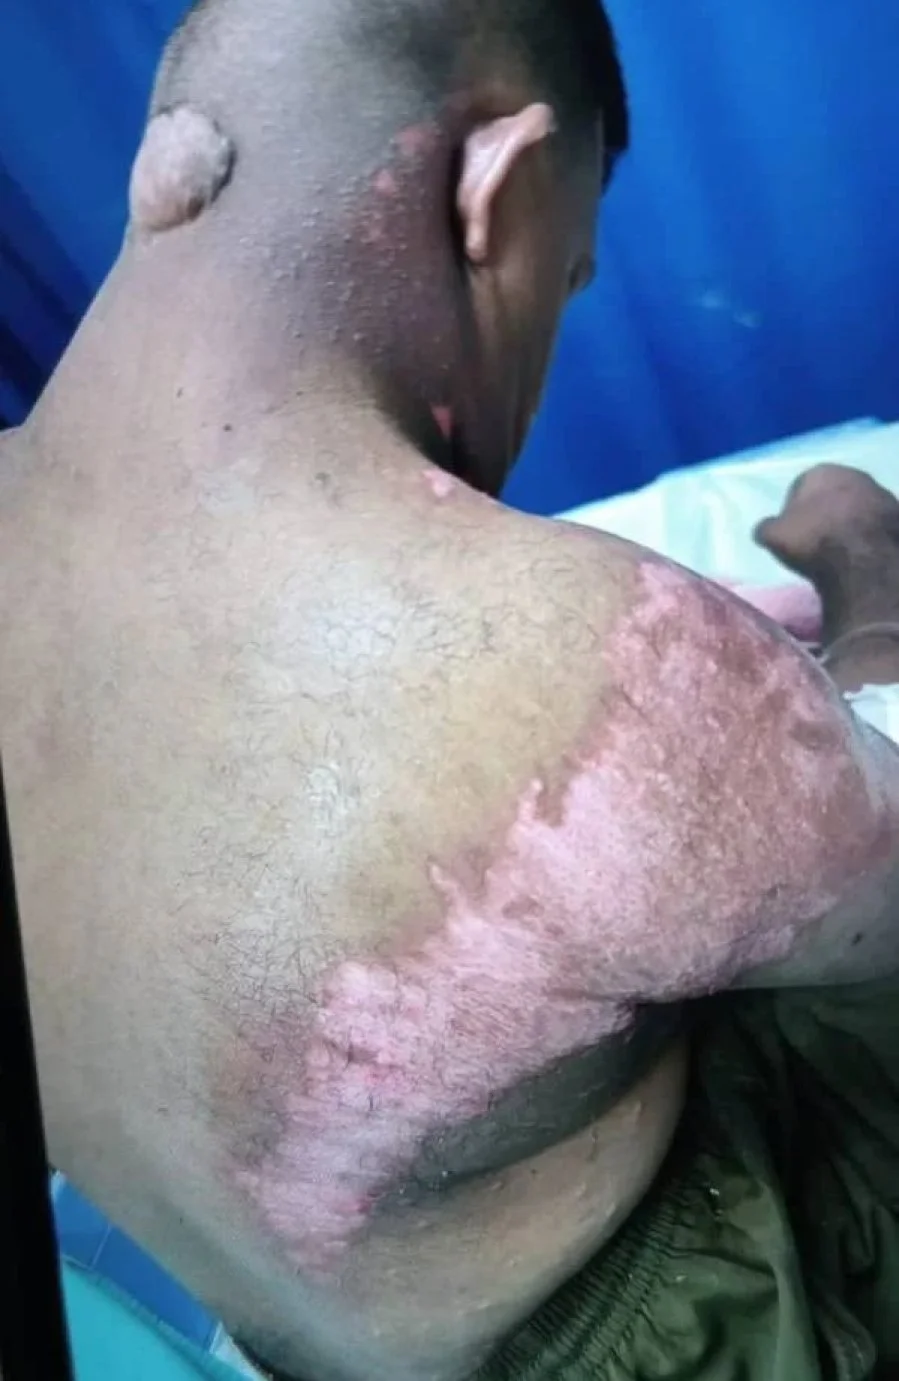 Burn wounds on man with down syndrome's body